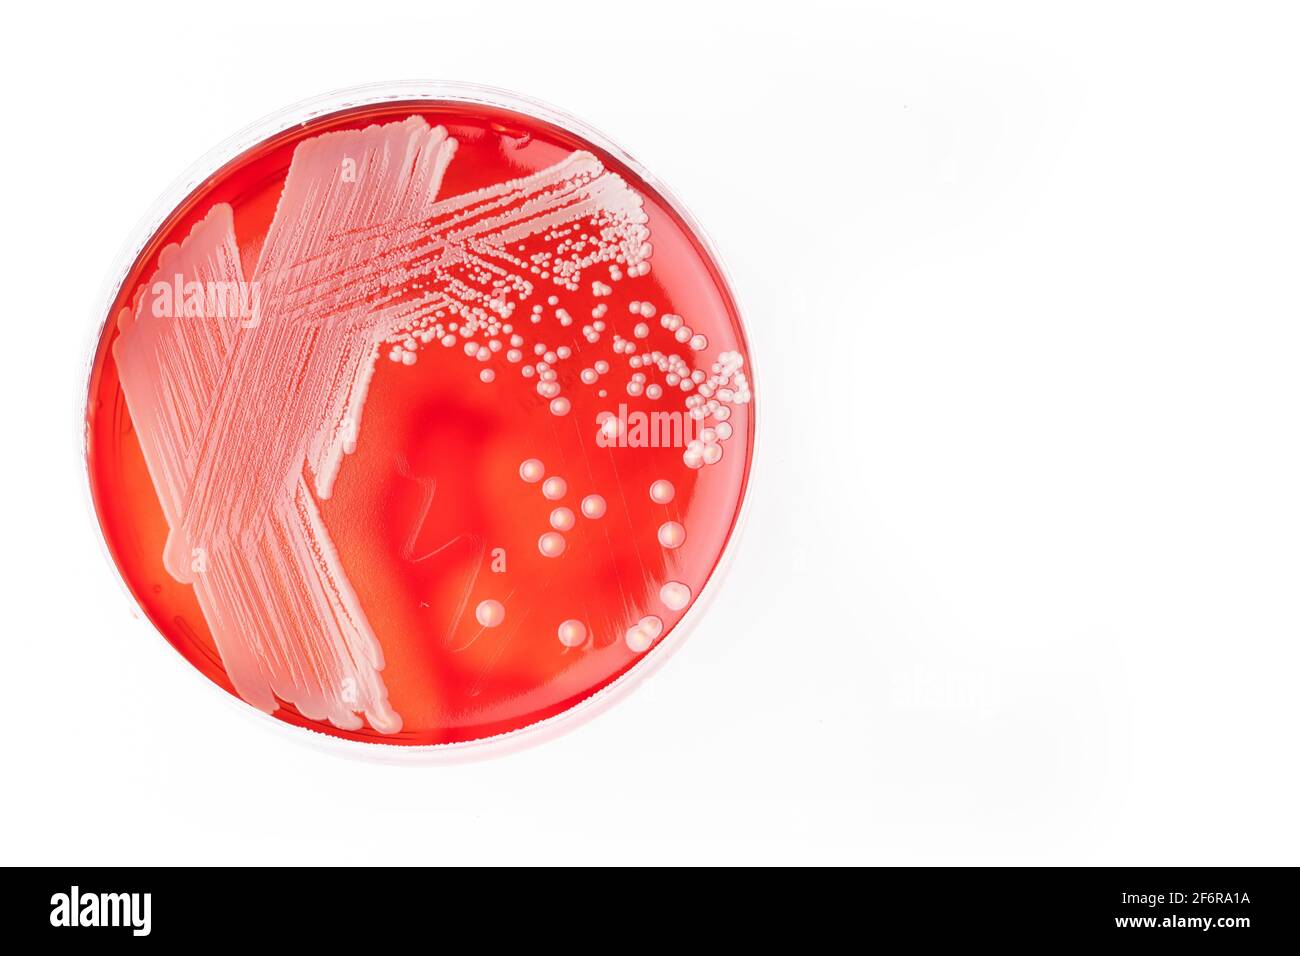 Staphylococcus aureus - bacterial cultures. White background Stock Photo